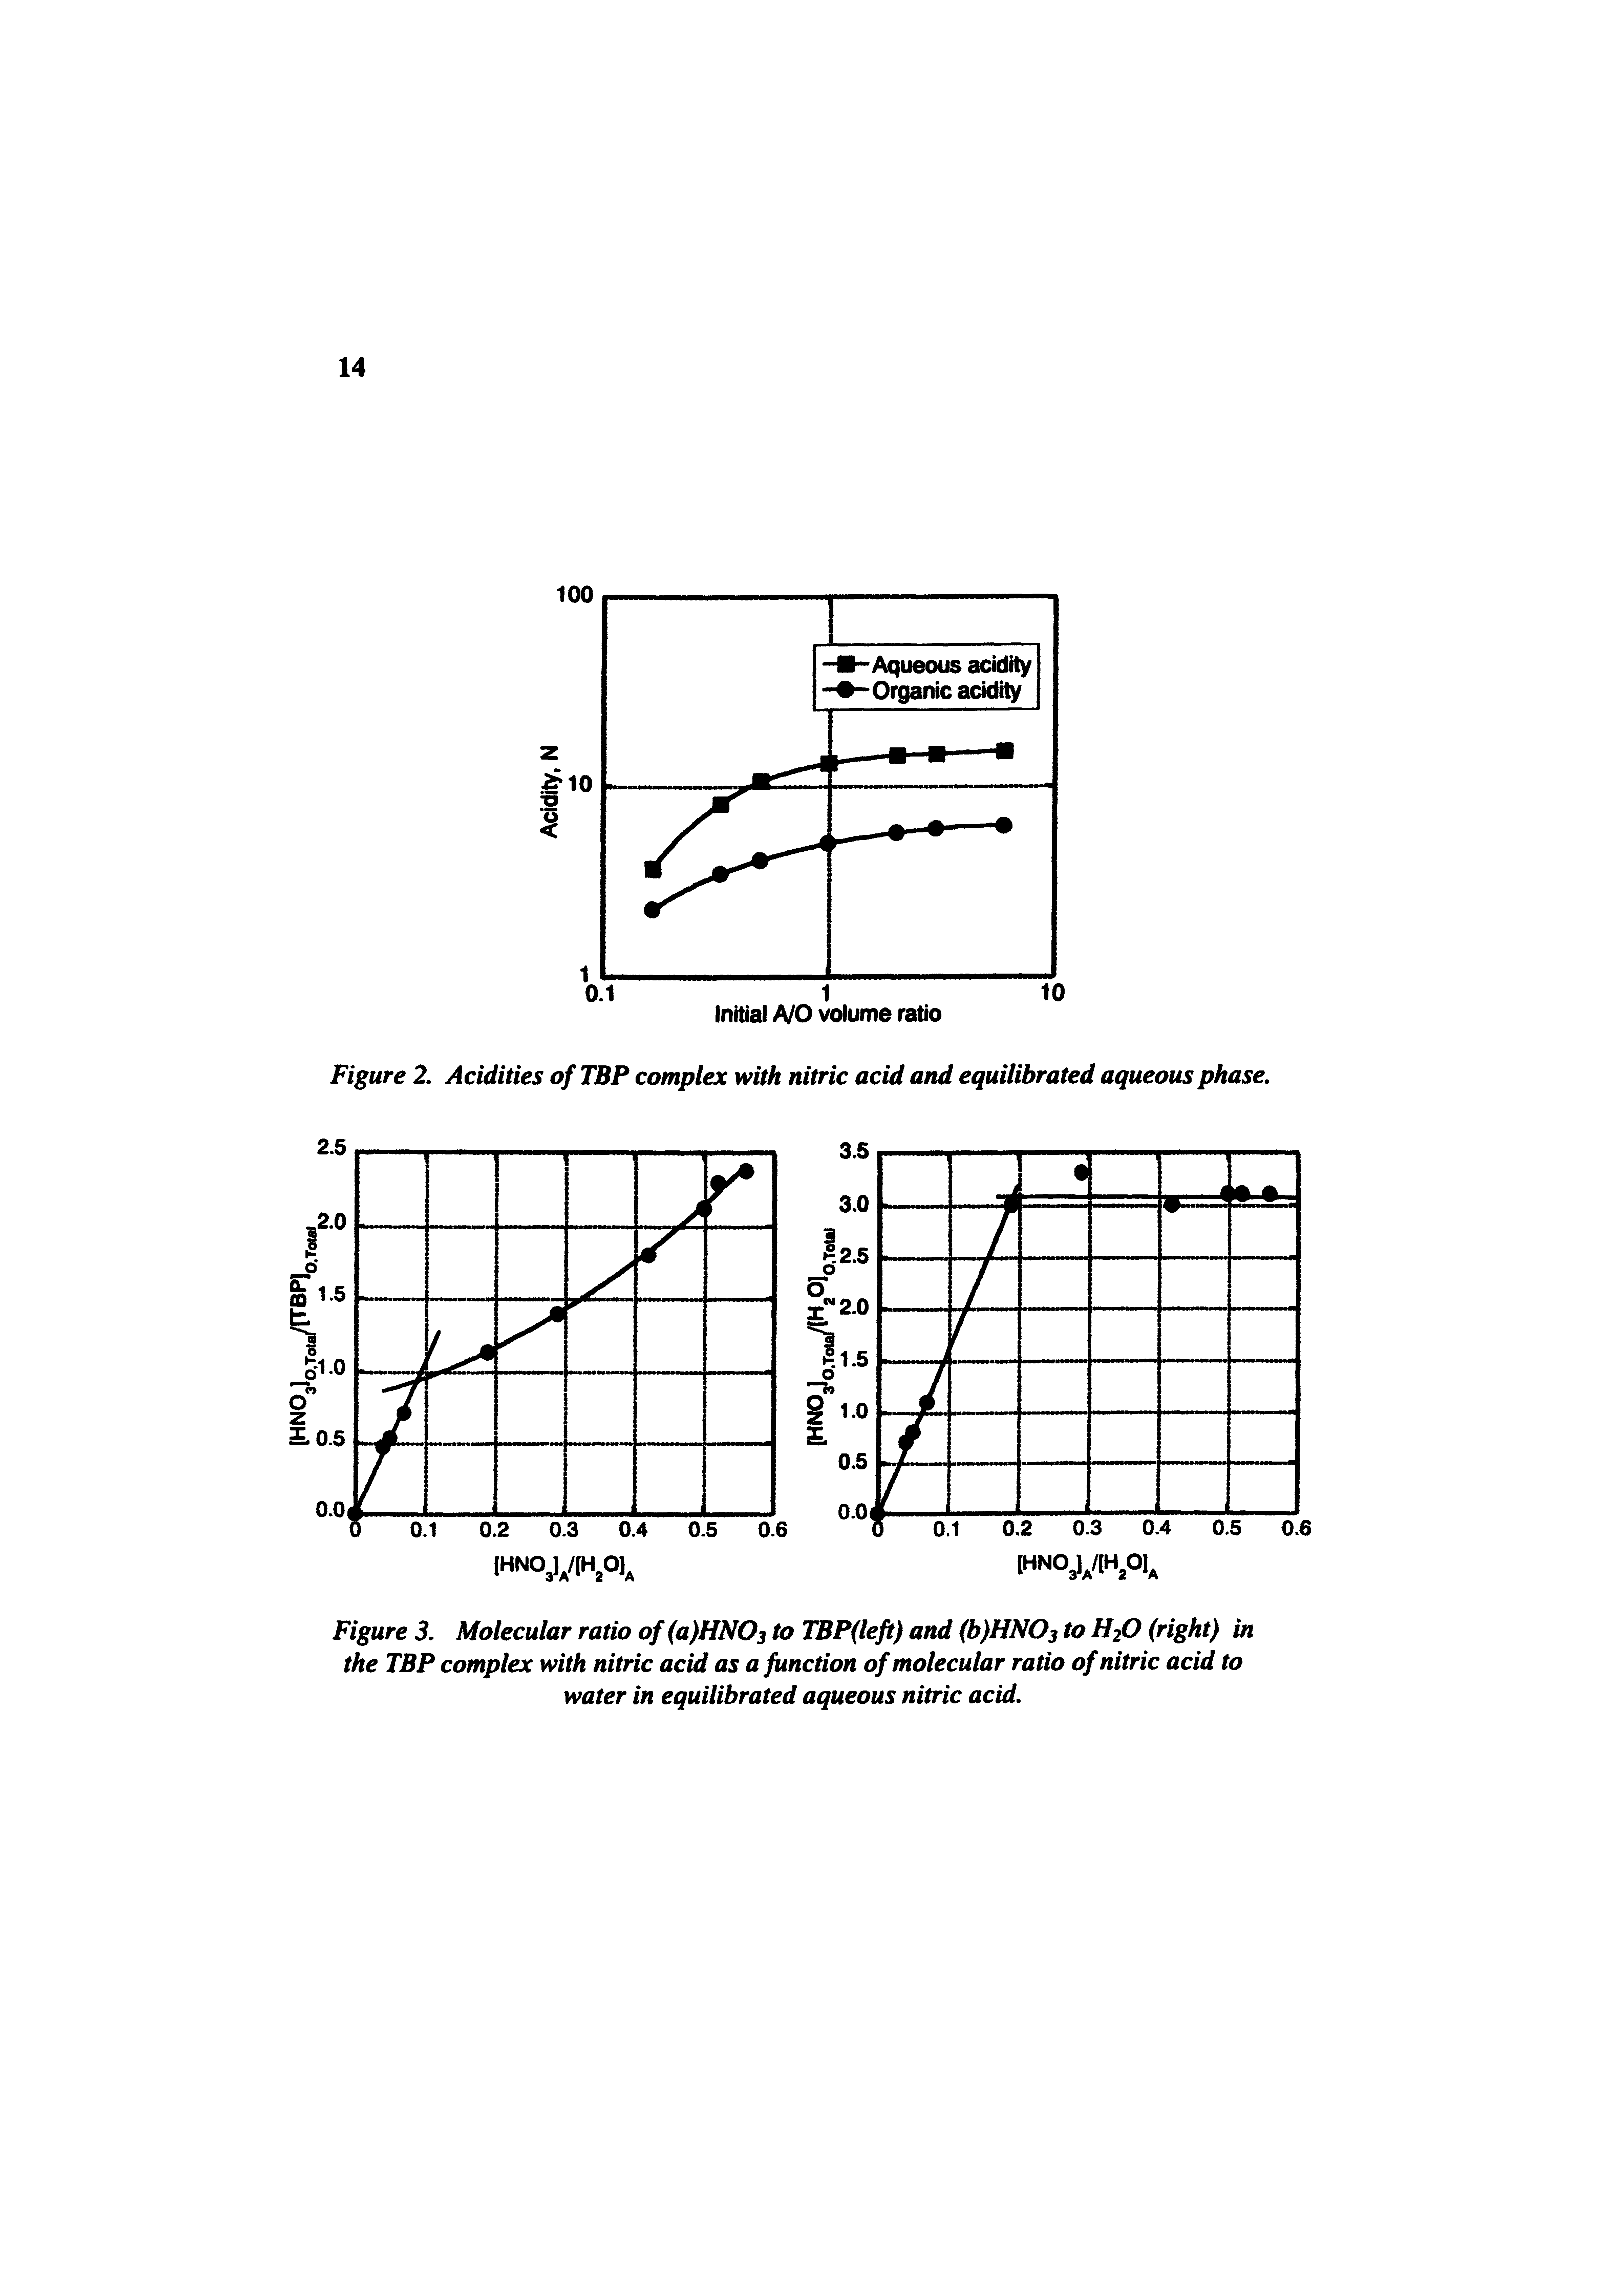 Figure 3. Molecular ratio of(a)HNOj to TBP(left) and (b)HNOs to H2O (right) in the TBP complex with nitric acid as a function of molecular ratio of nitric acid to water in equilibrated aqueous nitric acid.